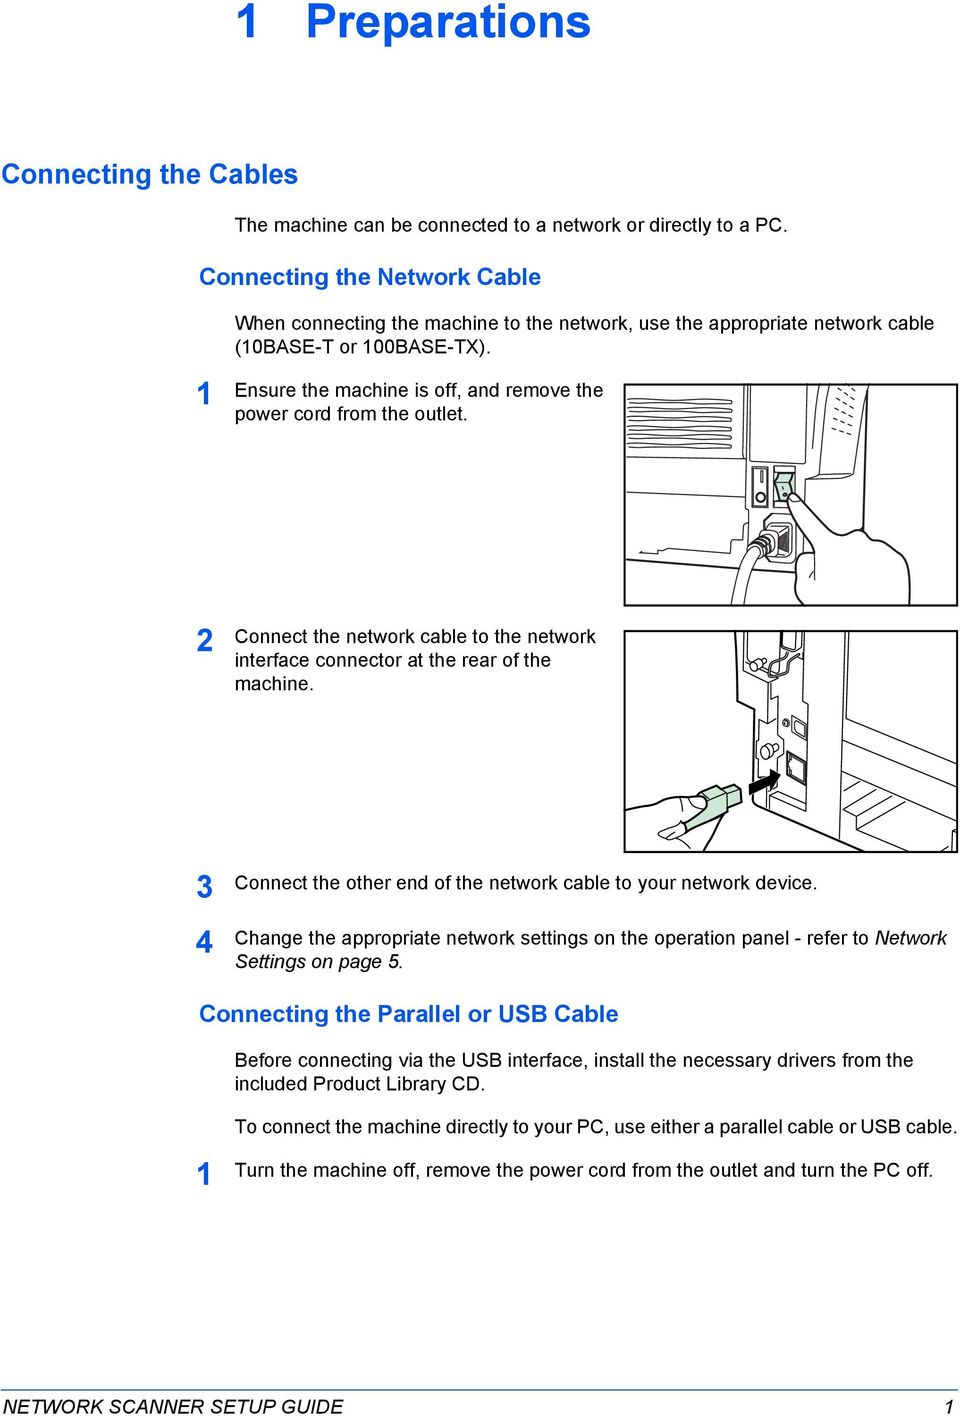 Ensure the machine is off, and remove the power cord from the outlet. 2 Connect the network cable to the network interface connector at the rear of the machine.